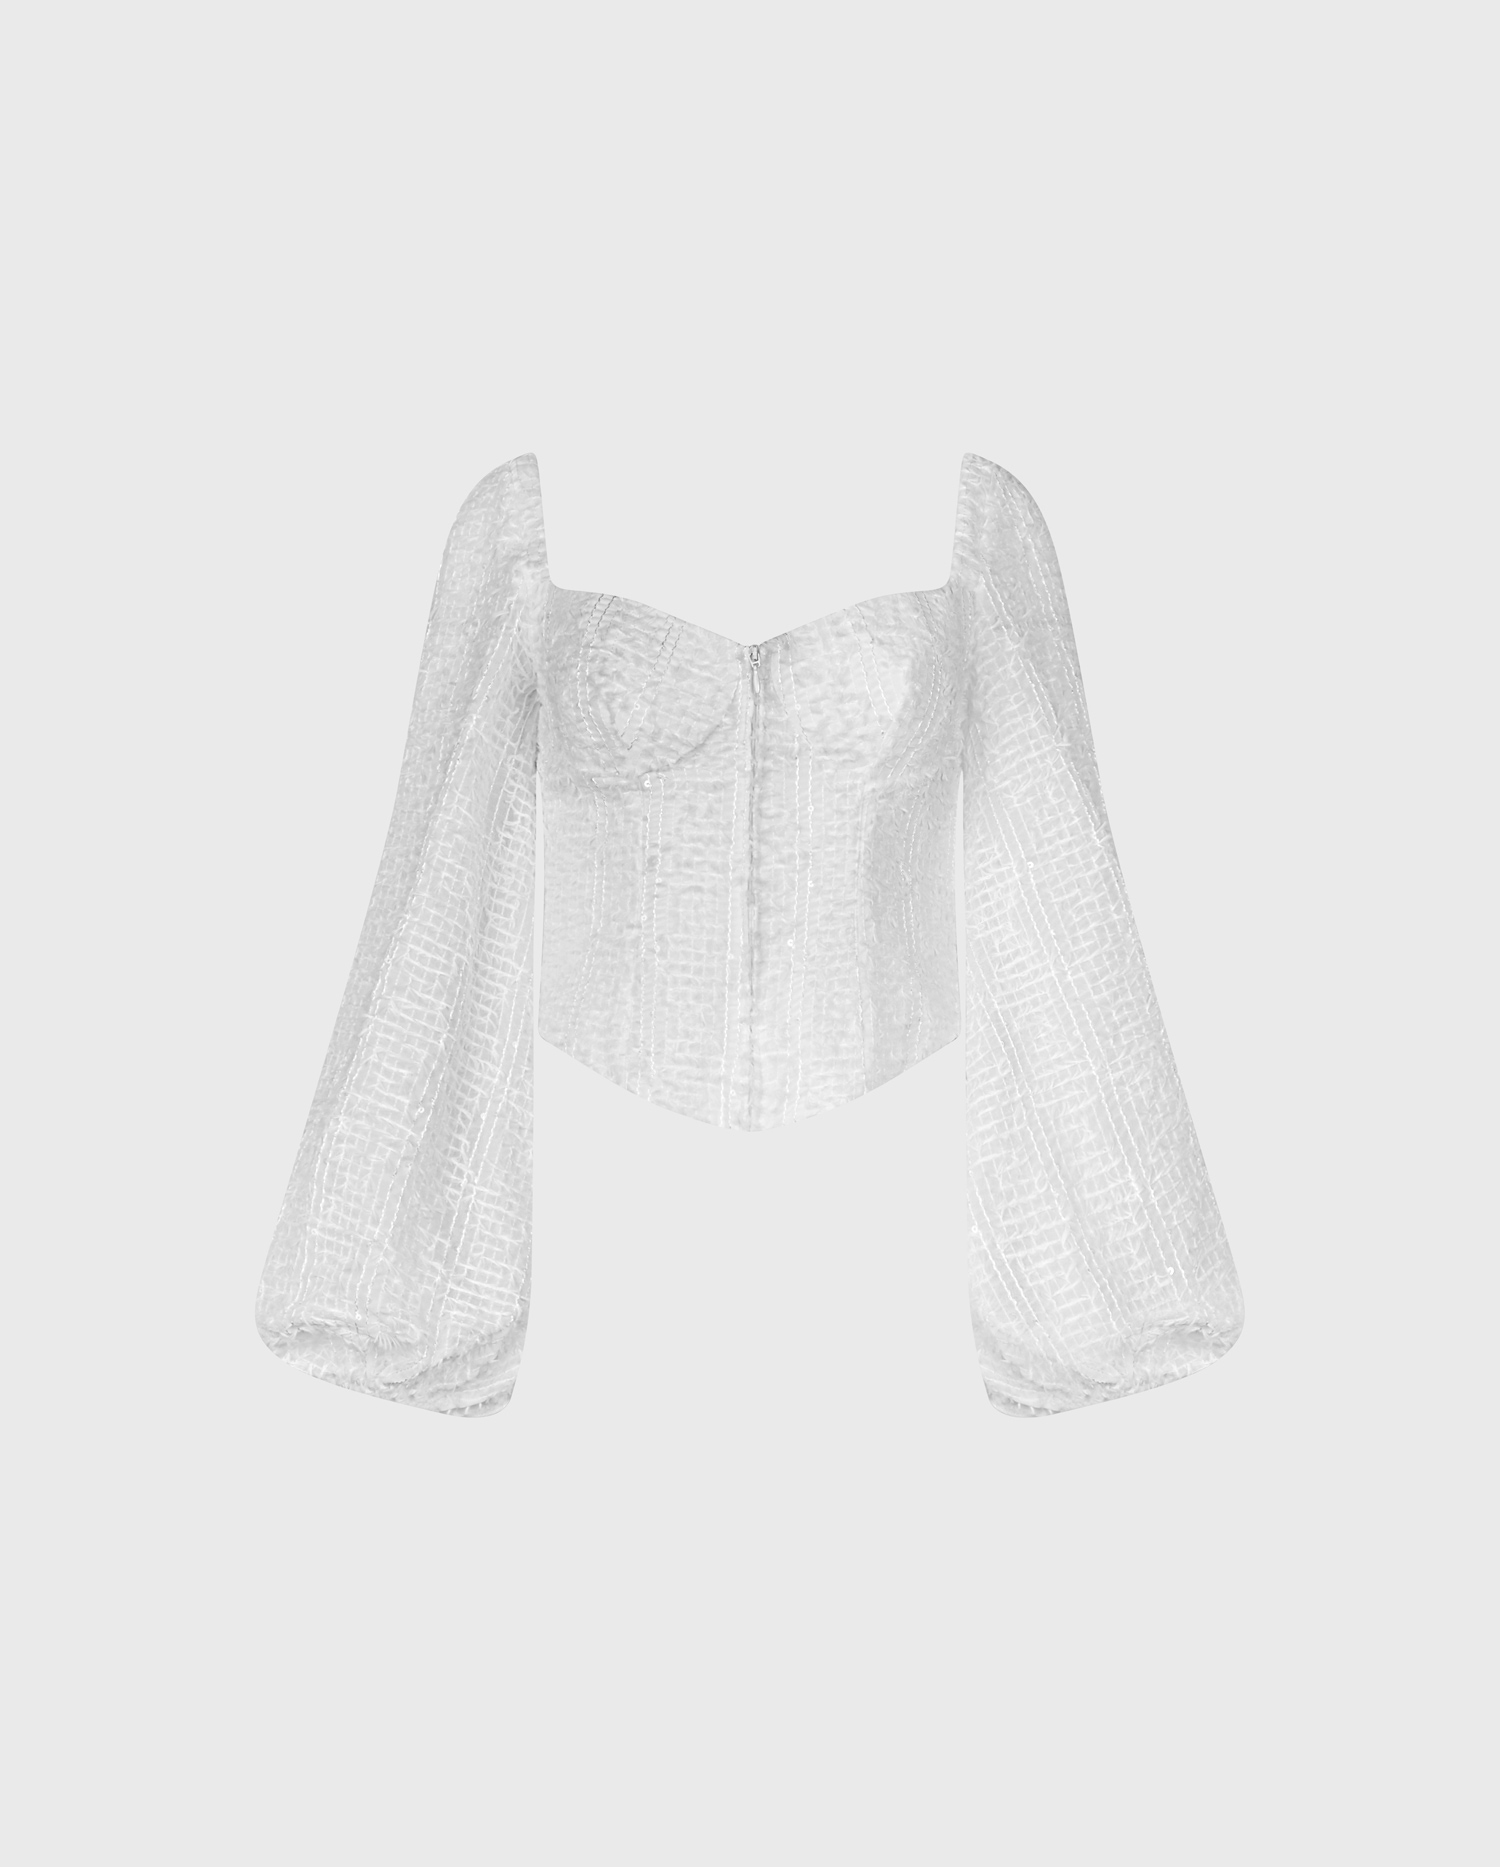 Discover the PLUME white textured corset top from ANNE FONTAINE